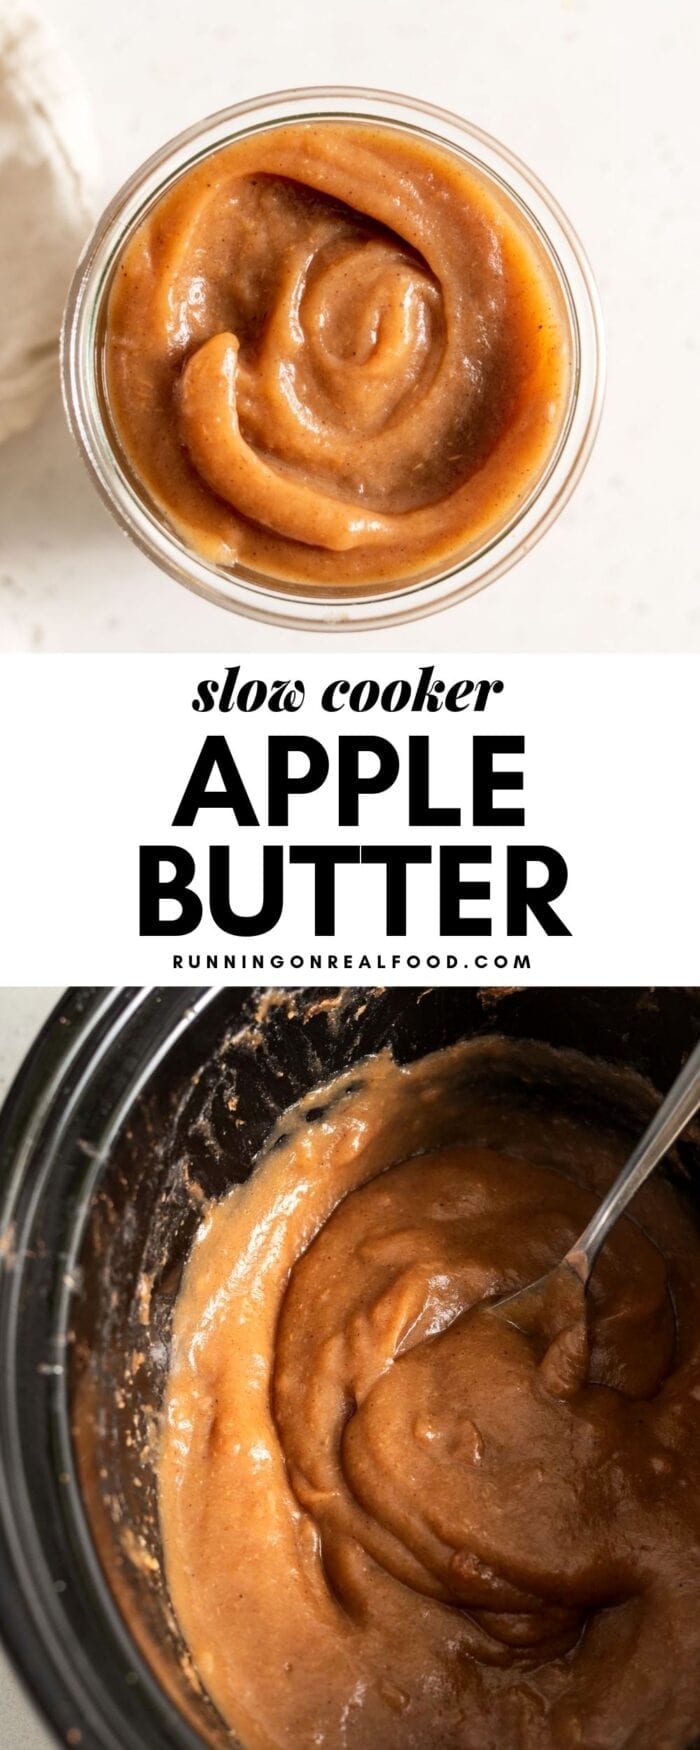 Pinterest collage for apple butter with an image and text overlay.